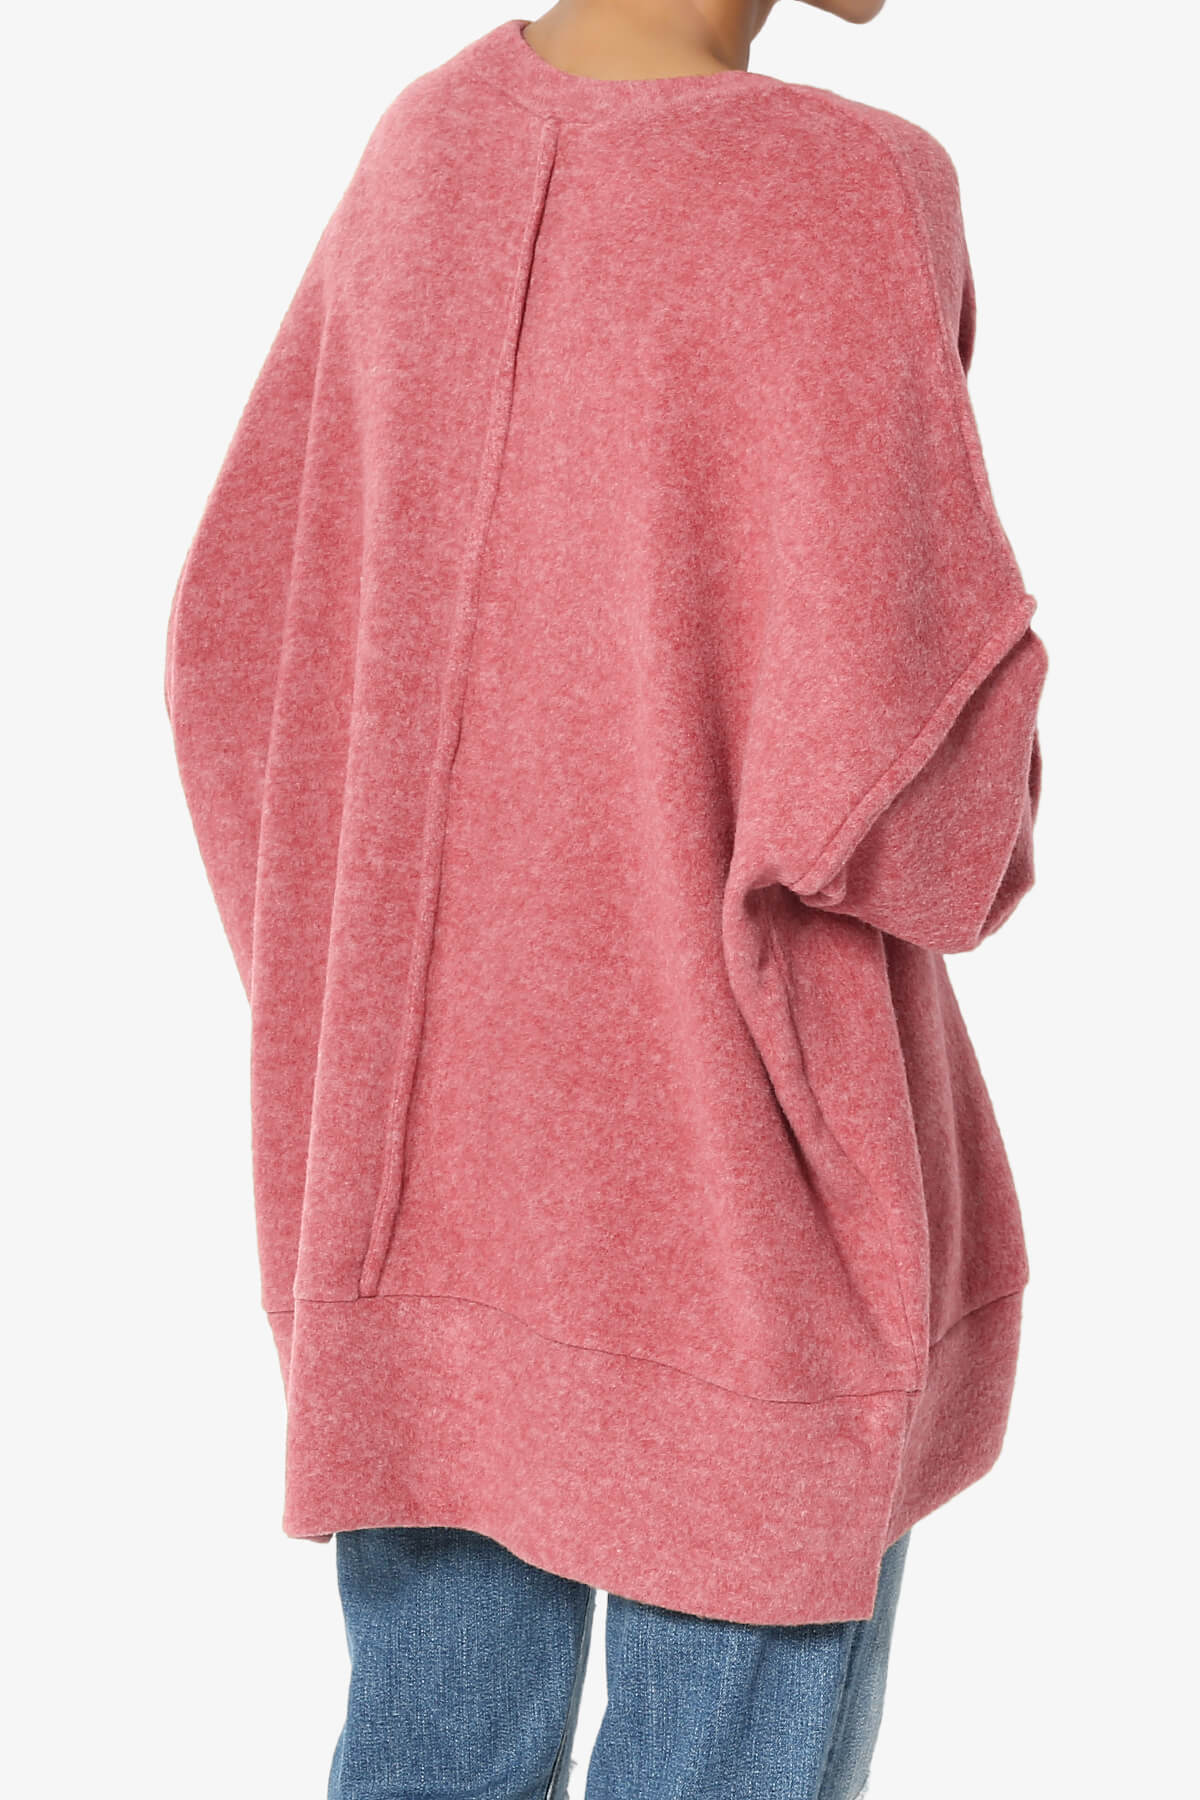 Load image into Gallery viewer, Breccan Blushed Knit Oversized Sweater ROSE_4
